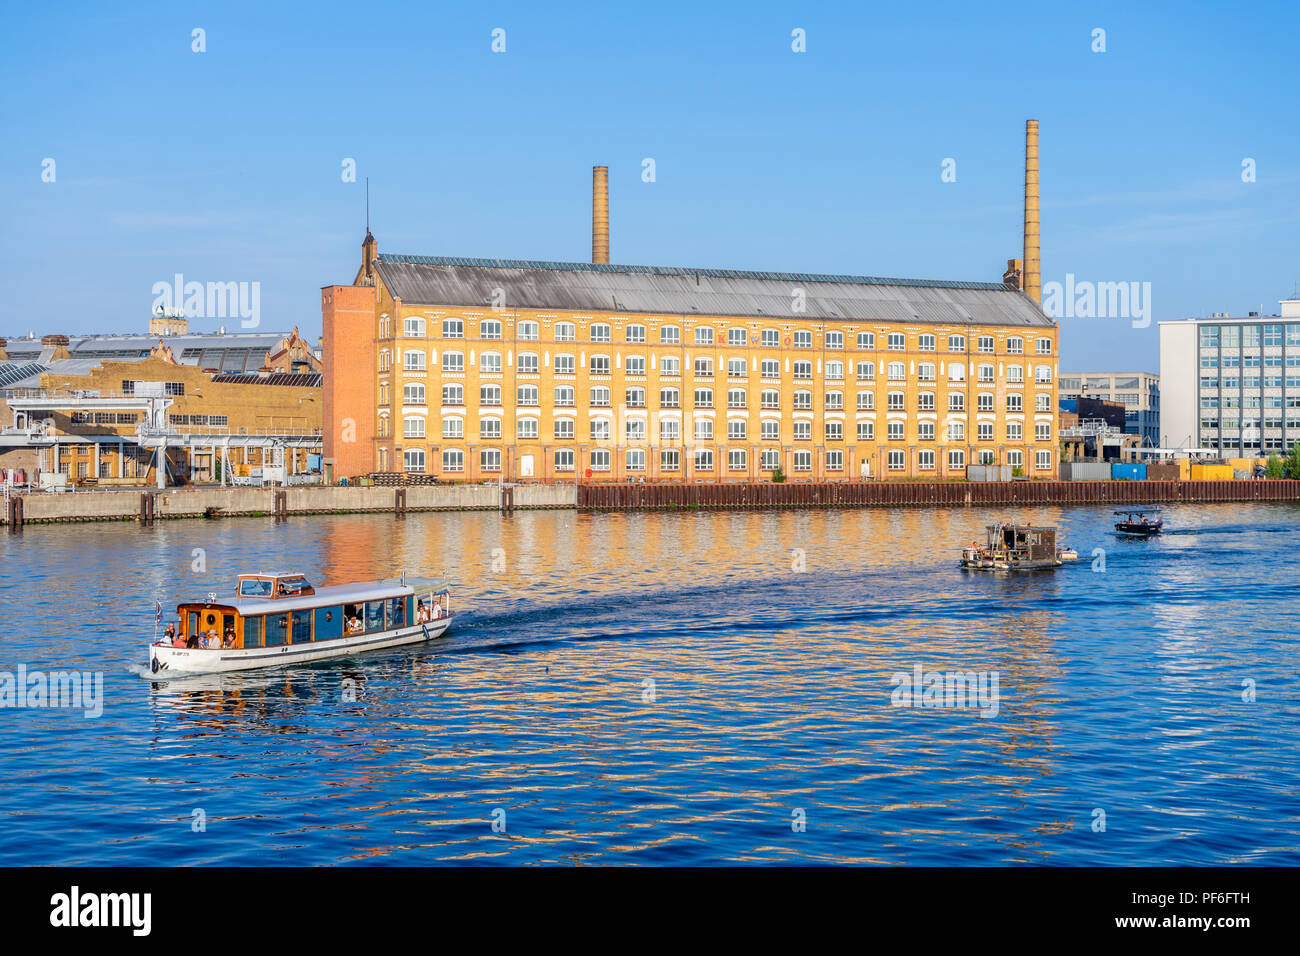 The former KWO (Kabelwerk Oberspree) listed building now partially in use by the University of Applied Sciences (HTW) Berlin, summer 2018, Germany Stock Photo